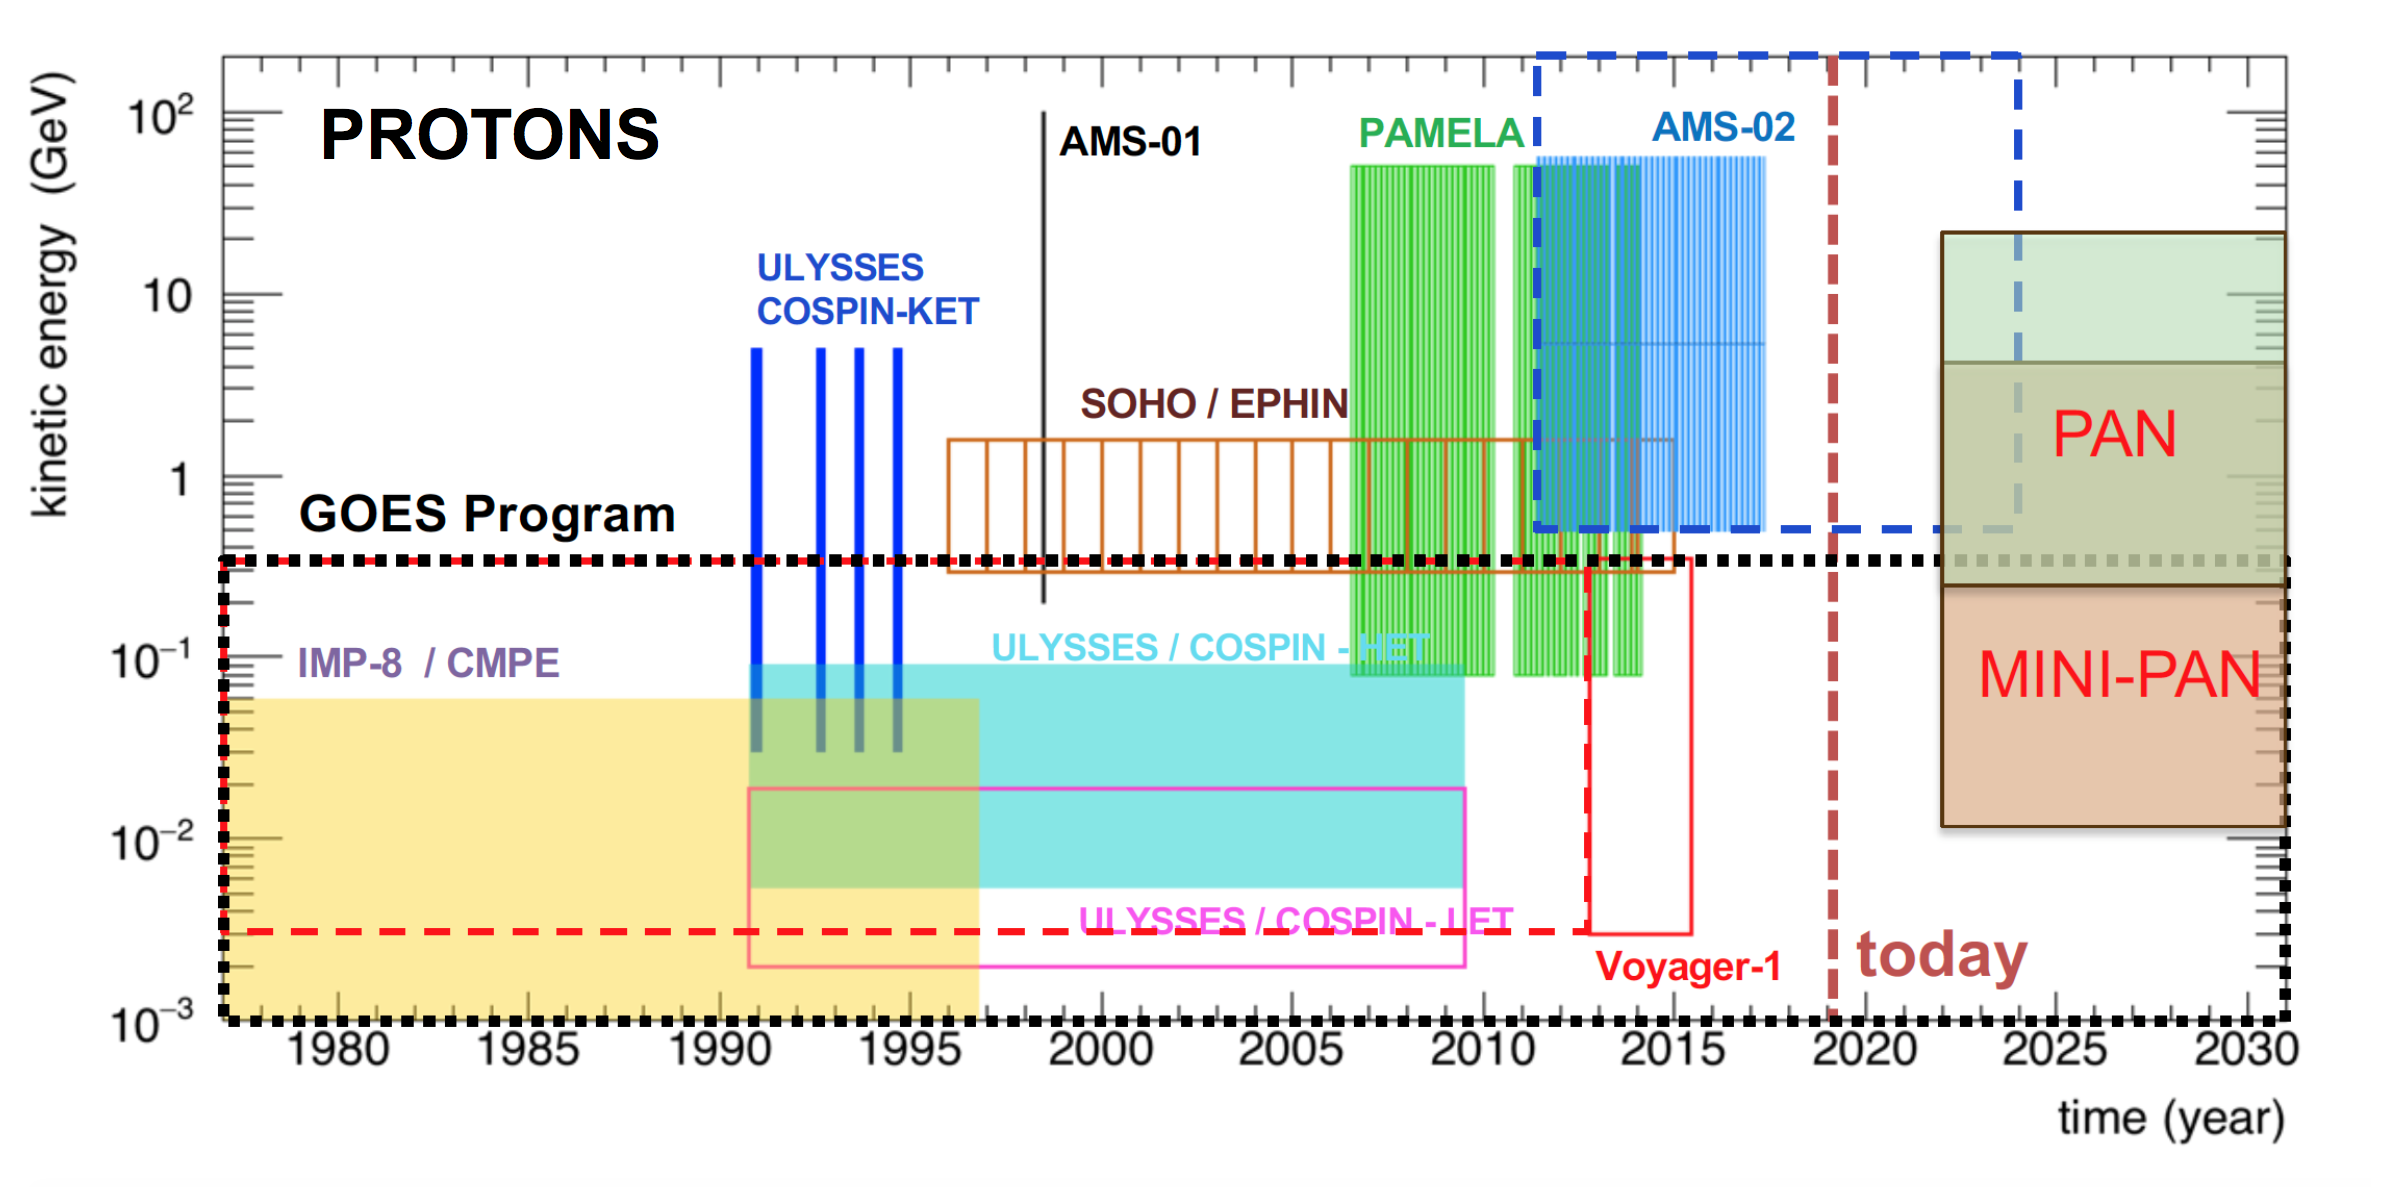 PAN_and_others_space_radiation_instruments_protons_reach